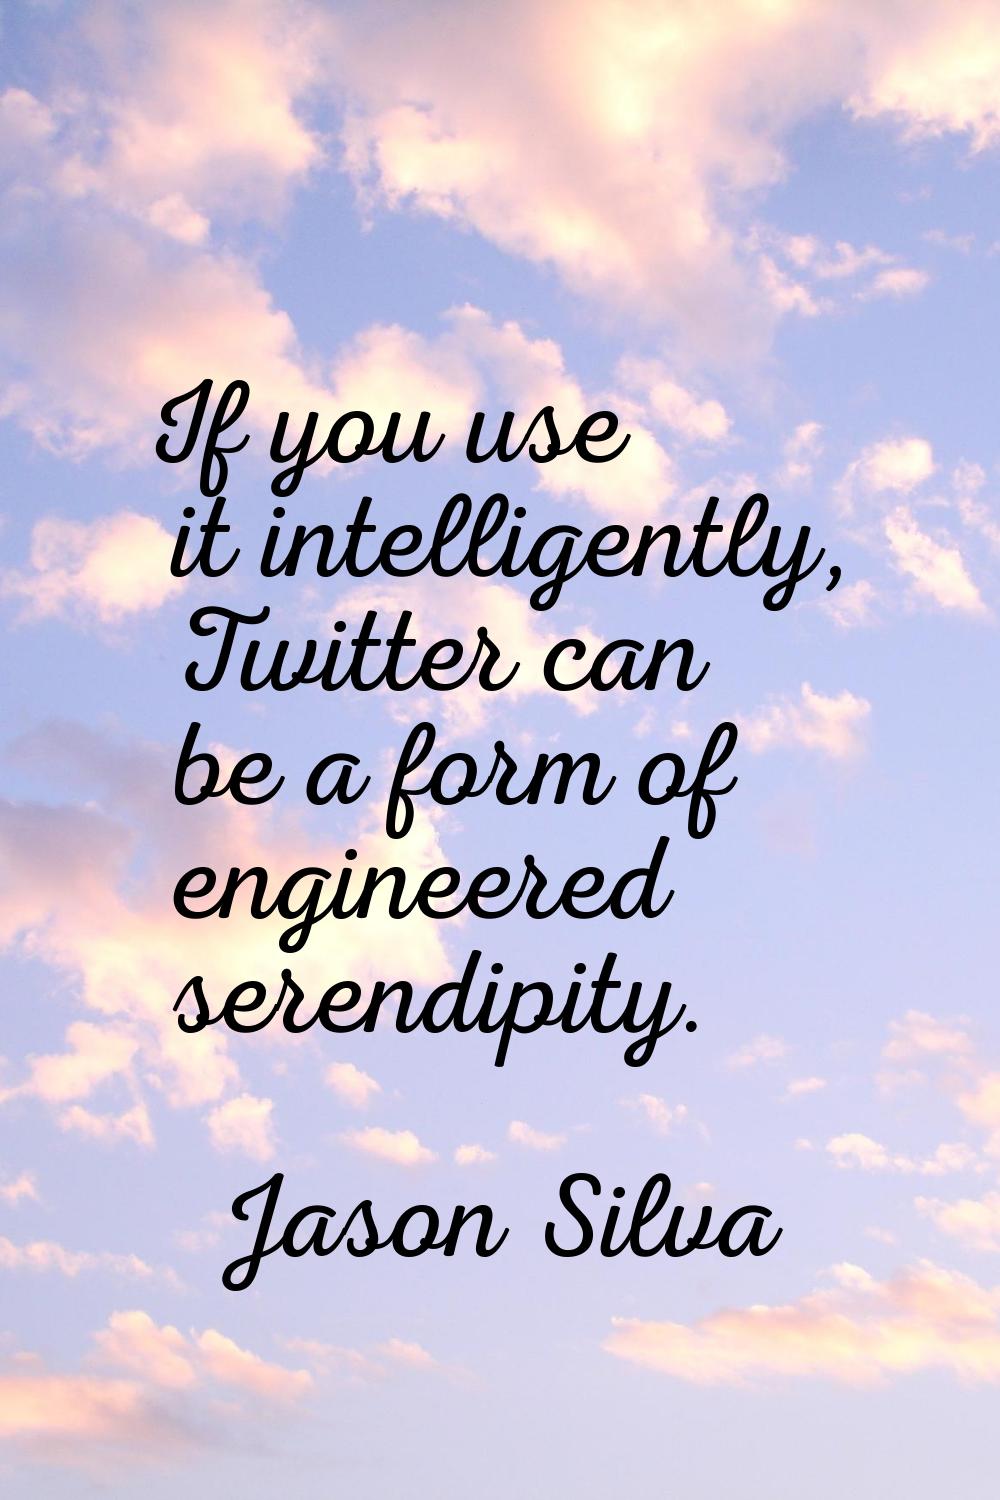 If you use it intelligently, Twitter can be a form of engineered serendipity.